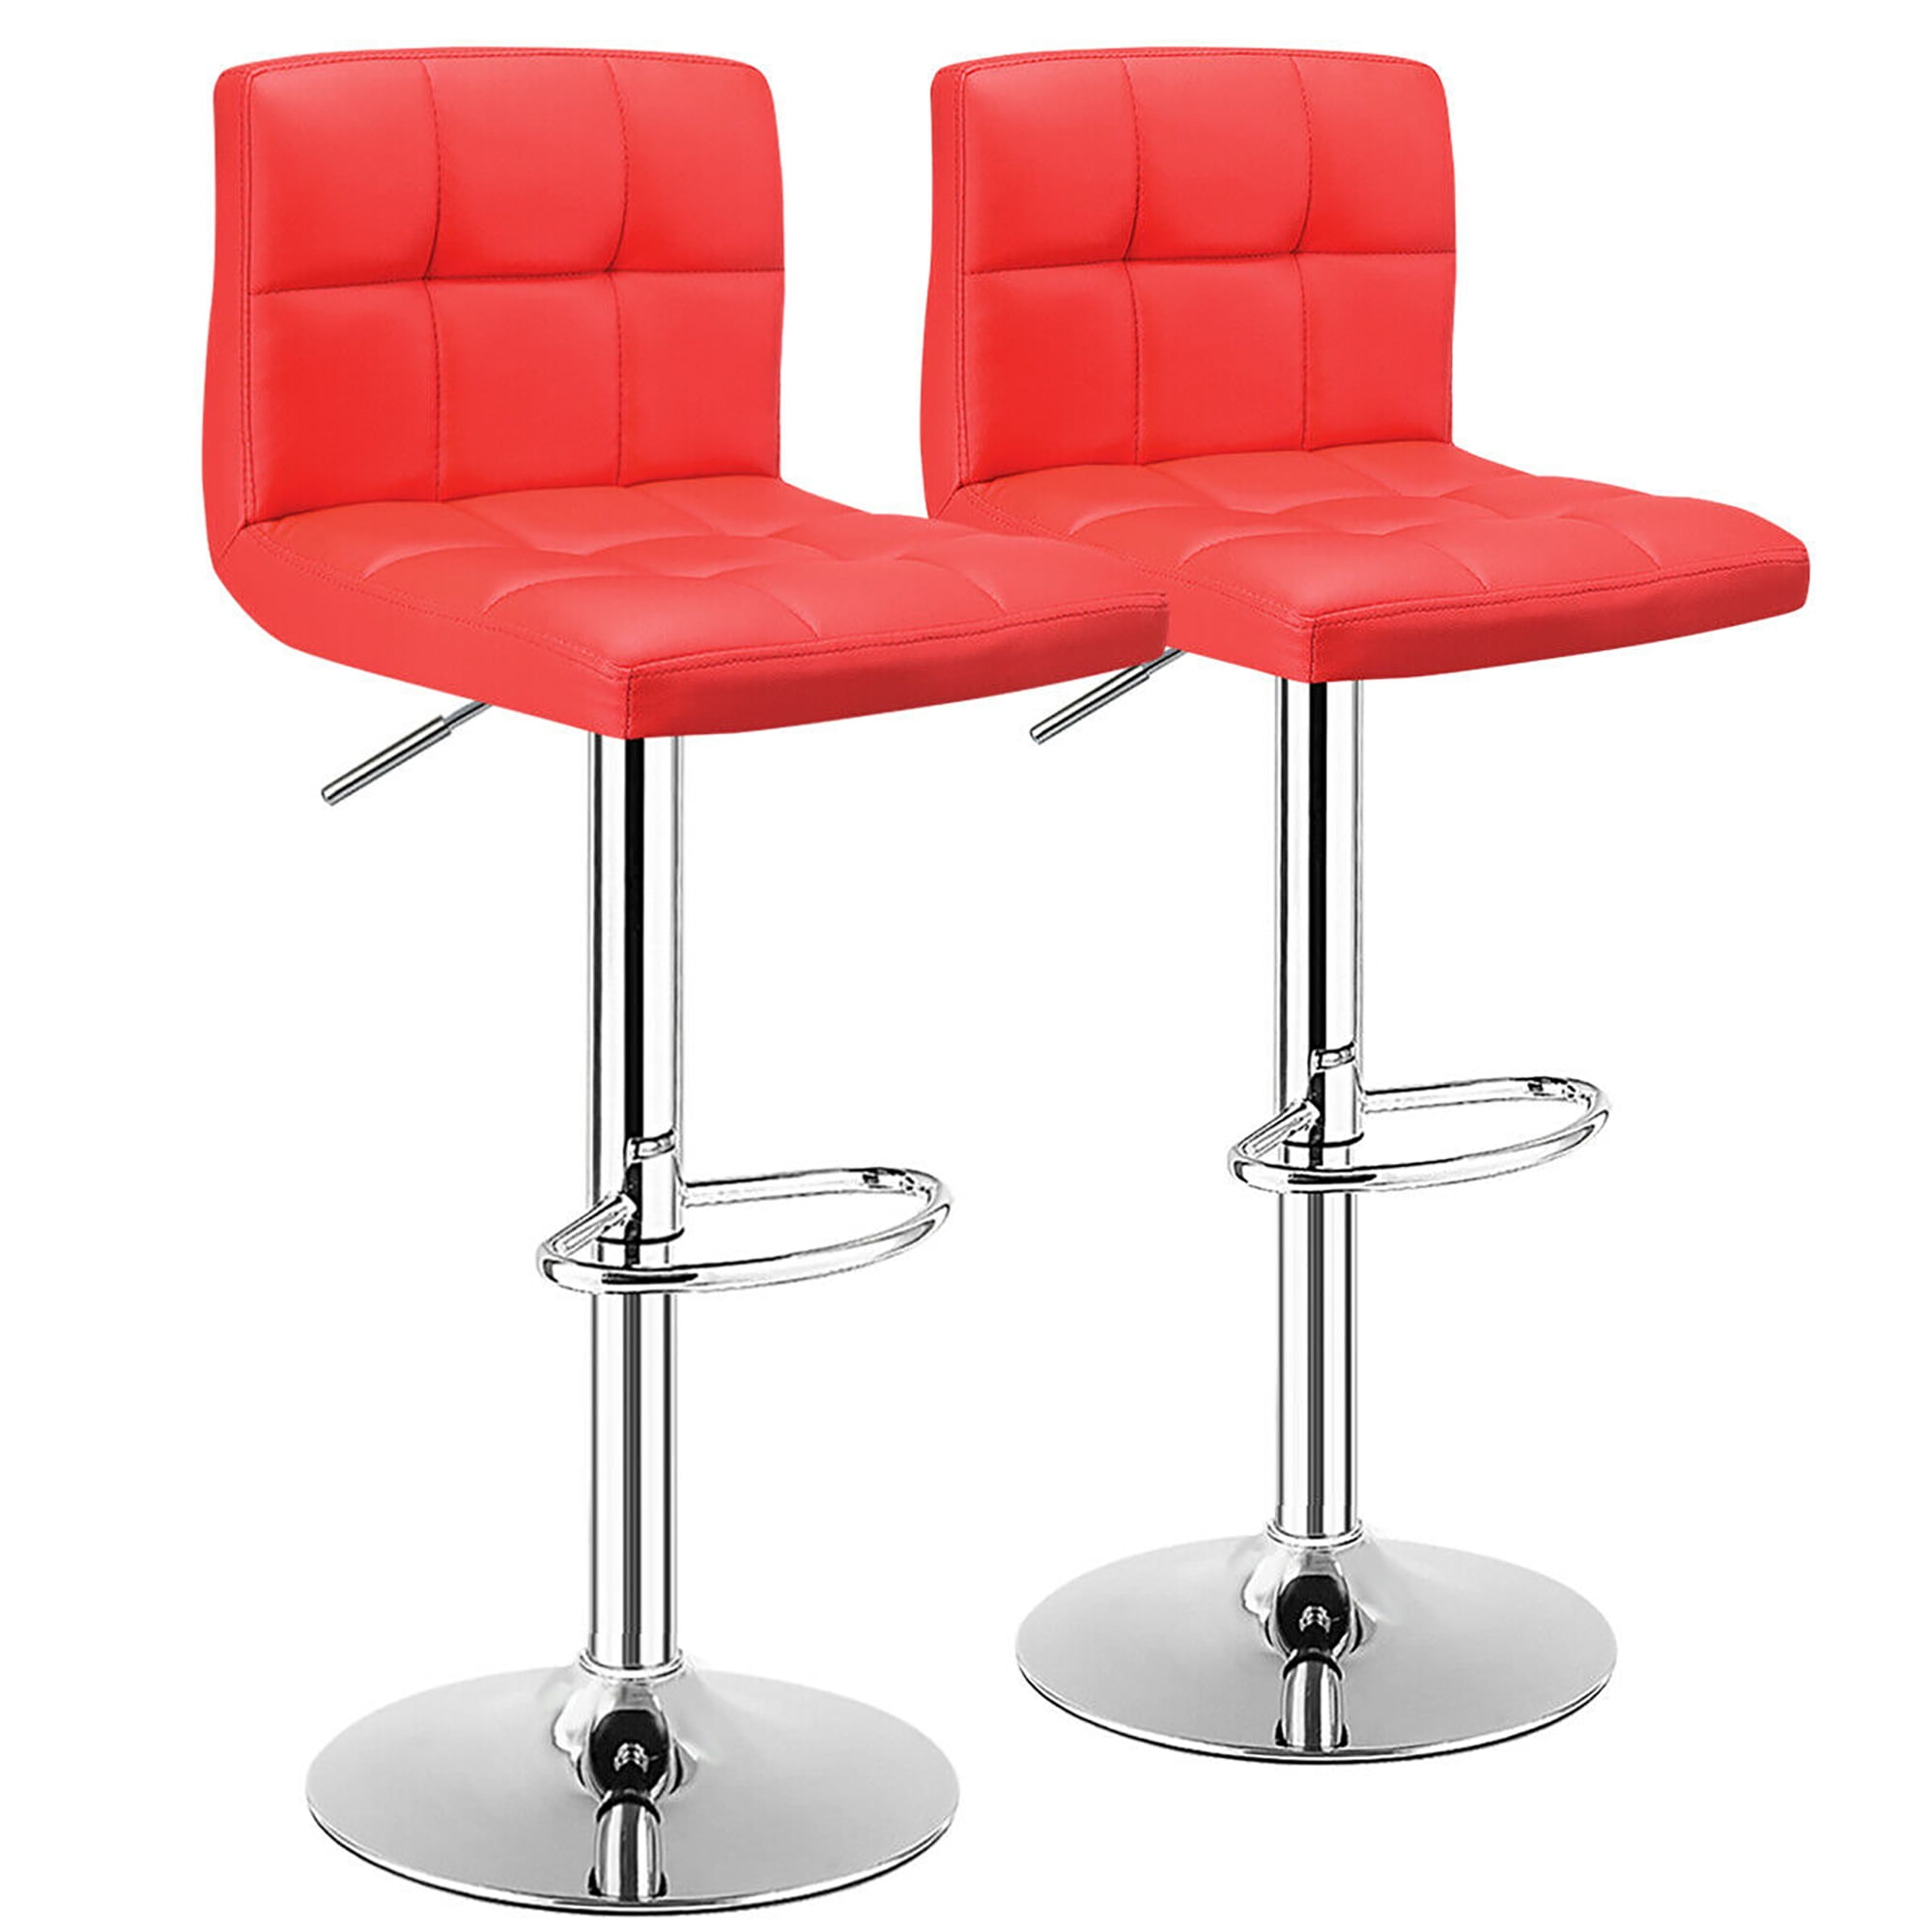 Costway Set Of 2 Bar Stools Adjustable, Red Leather Backless Bar Stools